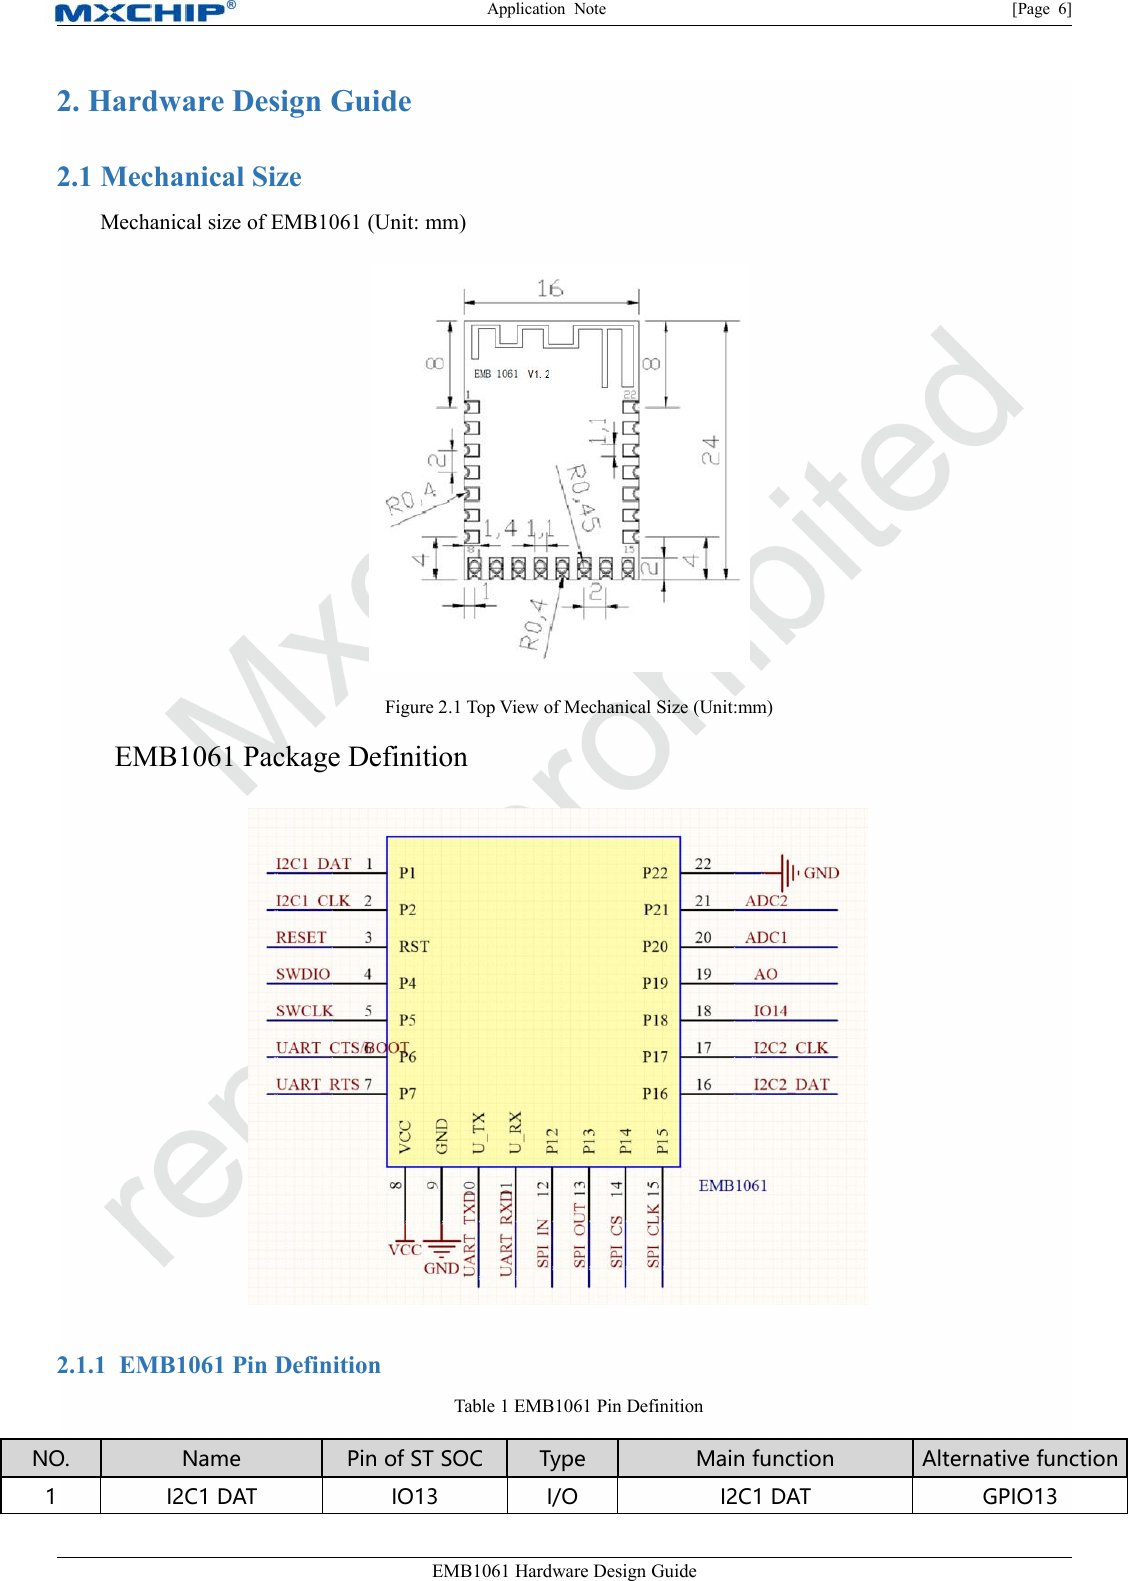 Application Note [Page 6]EMB1061 Hardware Design Guide2. Hardware Design Guide2.1 Mechanical SizeMechanical size of EMB1061 (Unit: mm)Figure 2.1 Top View of Mechanical Size (Unit:mm)EMB1061 Package Definition2.1.1 EMB1061 Pin DefinitionTable 1 EMB1061 Pin DefinitionNO.NamePin of ST SOCTypeMain functionAlternative function1I2C1 DATIO13I/OI2C1 DATGPIO13